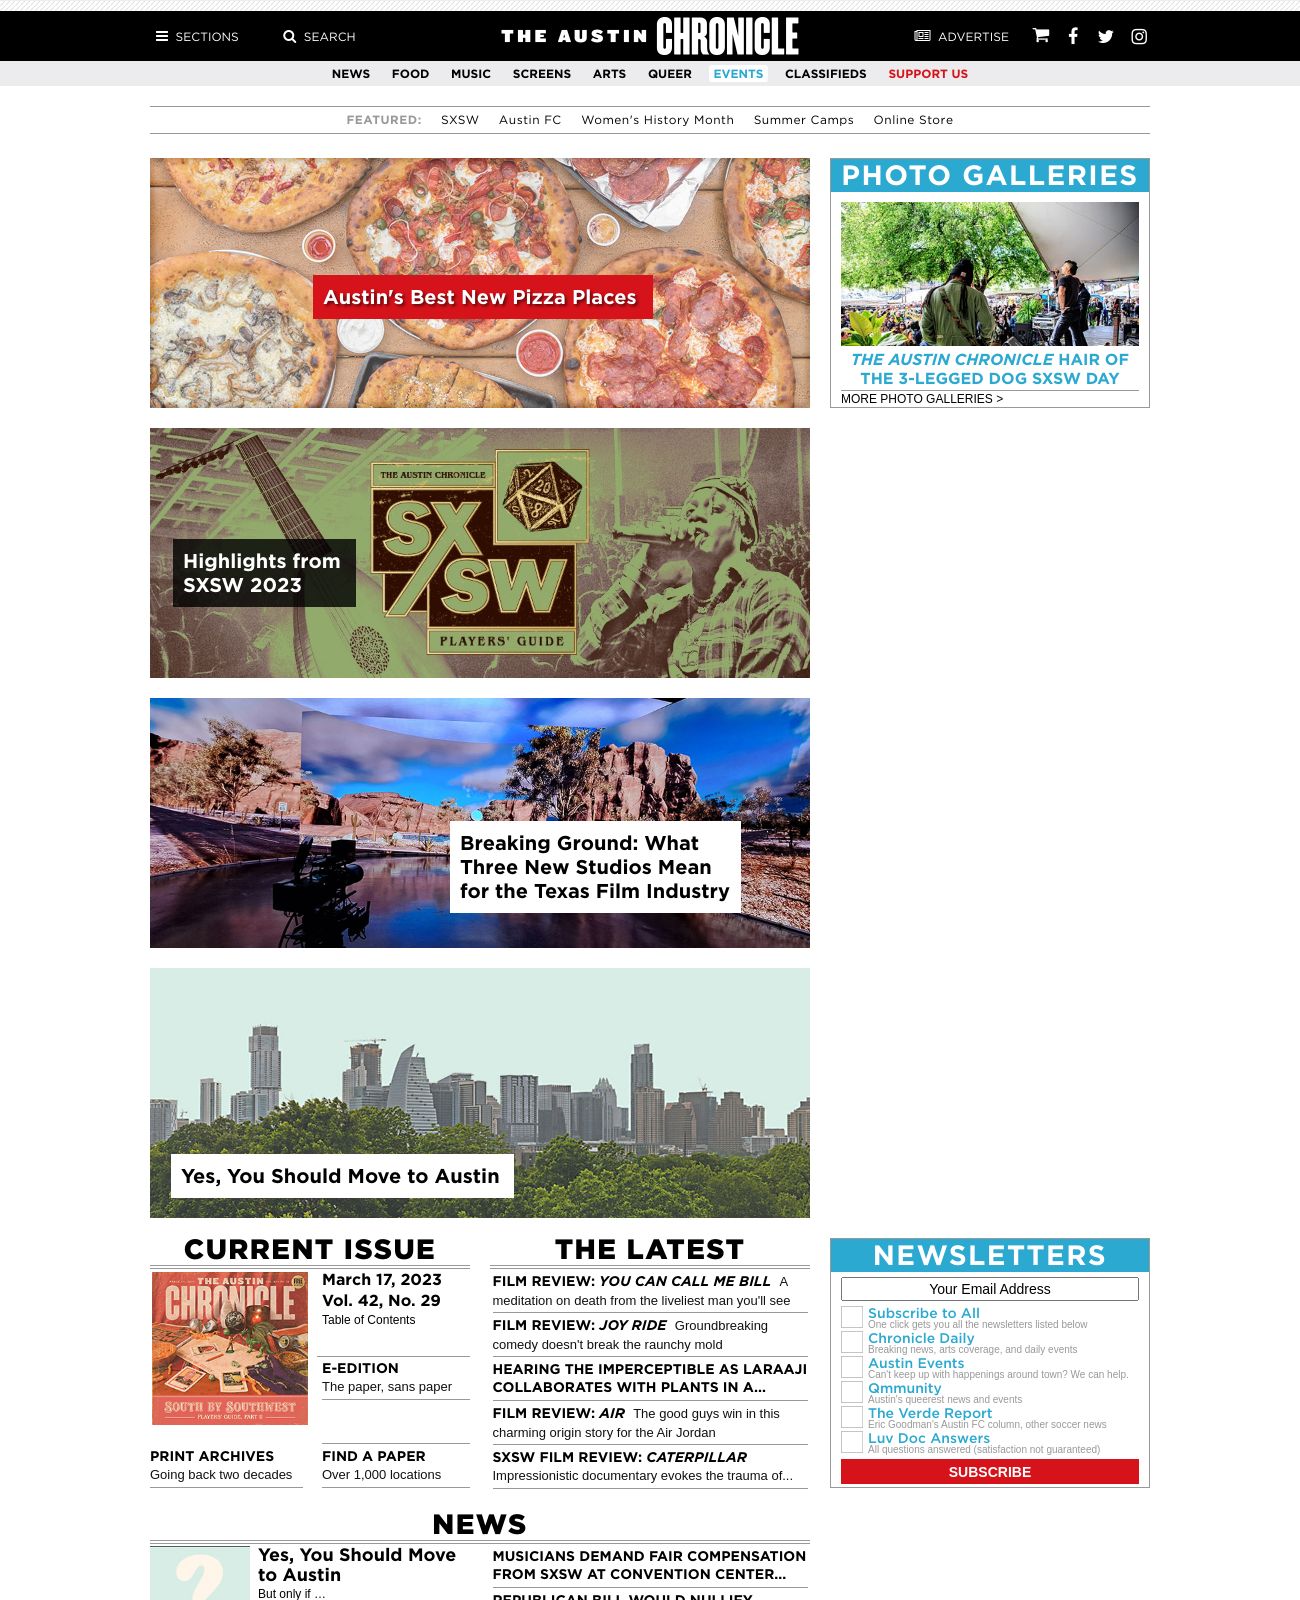 Austin Chronicle at 2023-03-20 05:17:15-05:00 local time